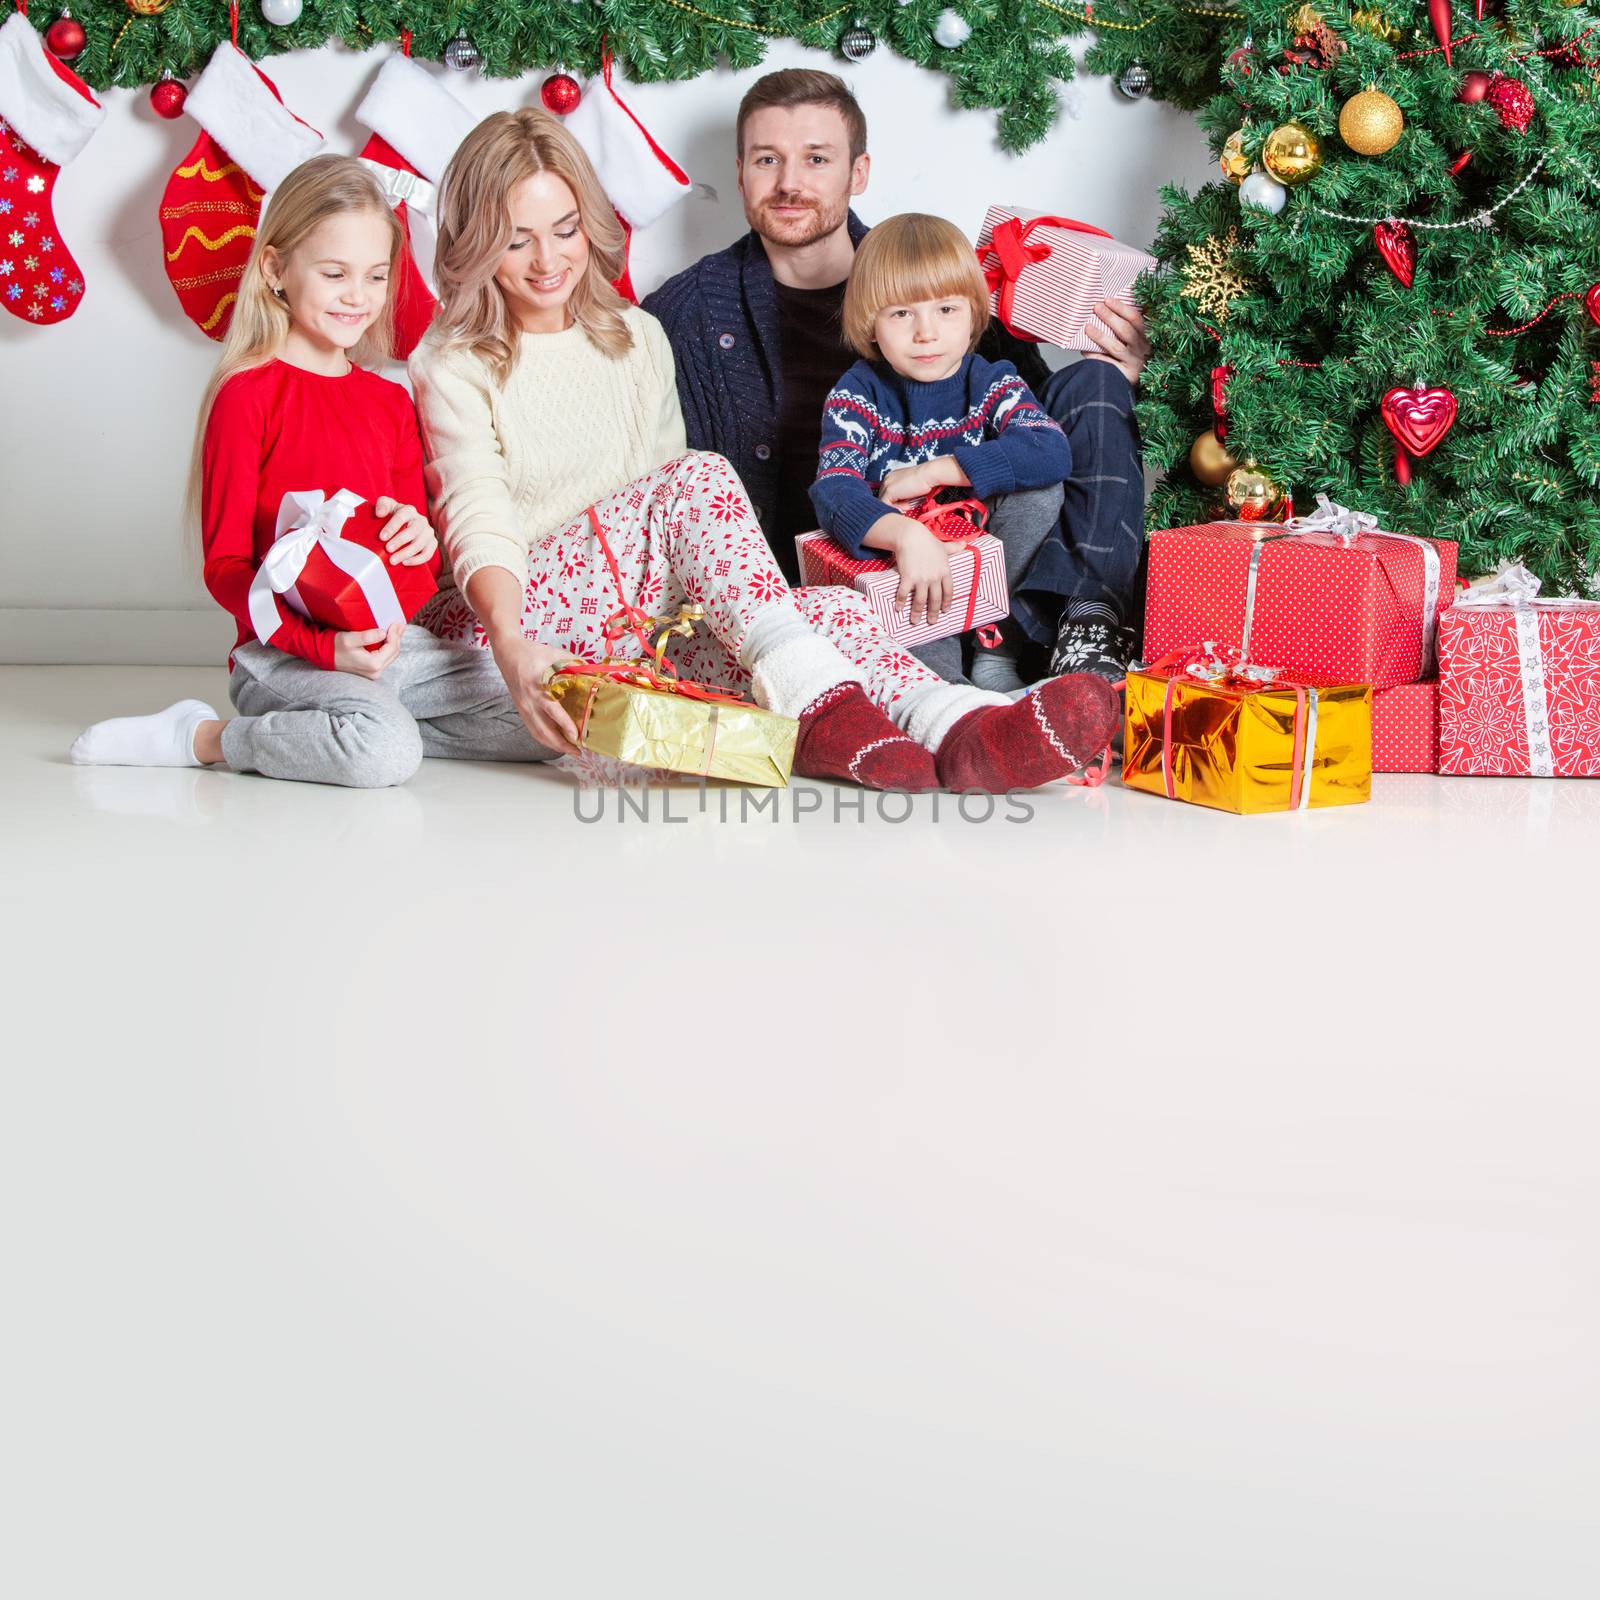 Cheerful family with Christmas gifts by ALotOfPeople